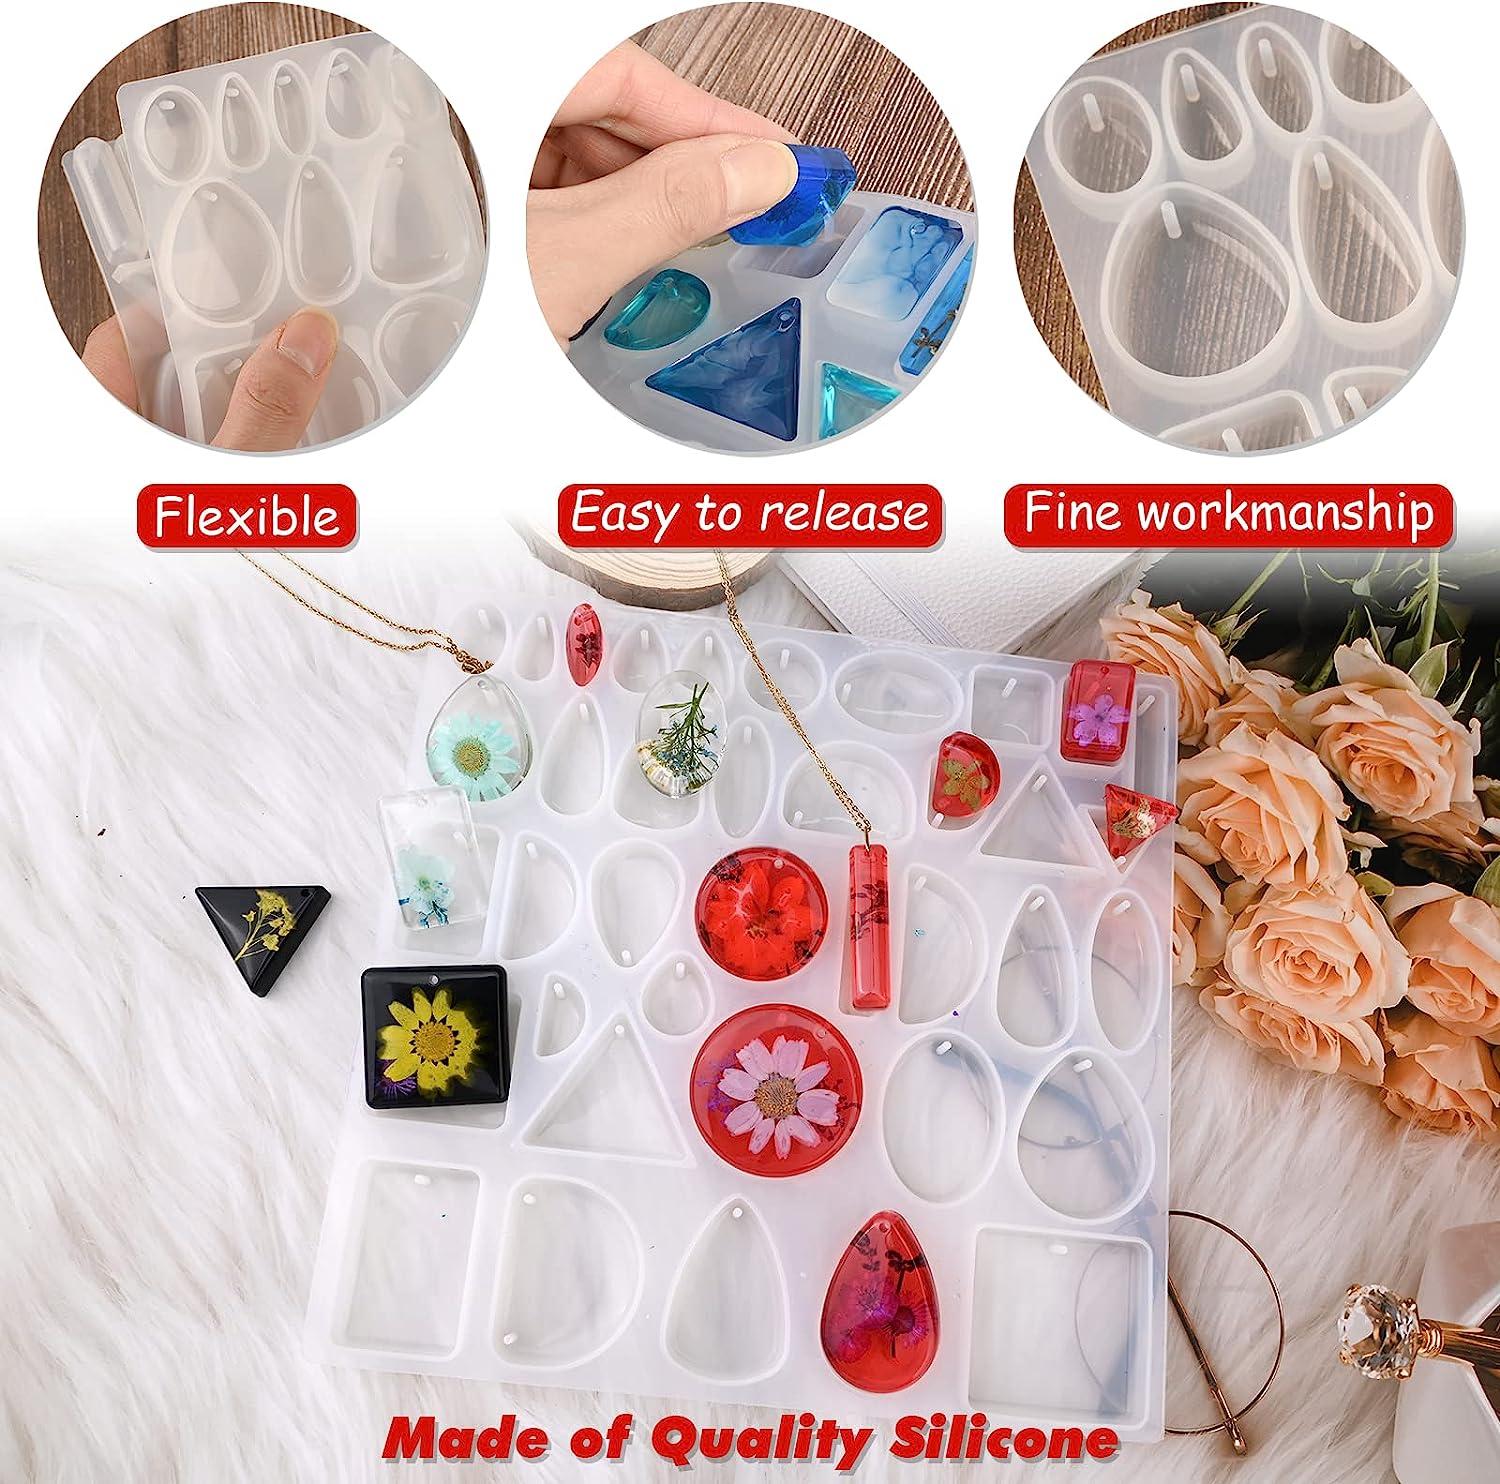 Resin Jewellery Mould, Flexible Ring Mold